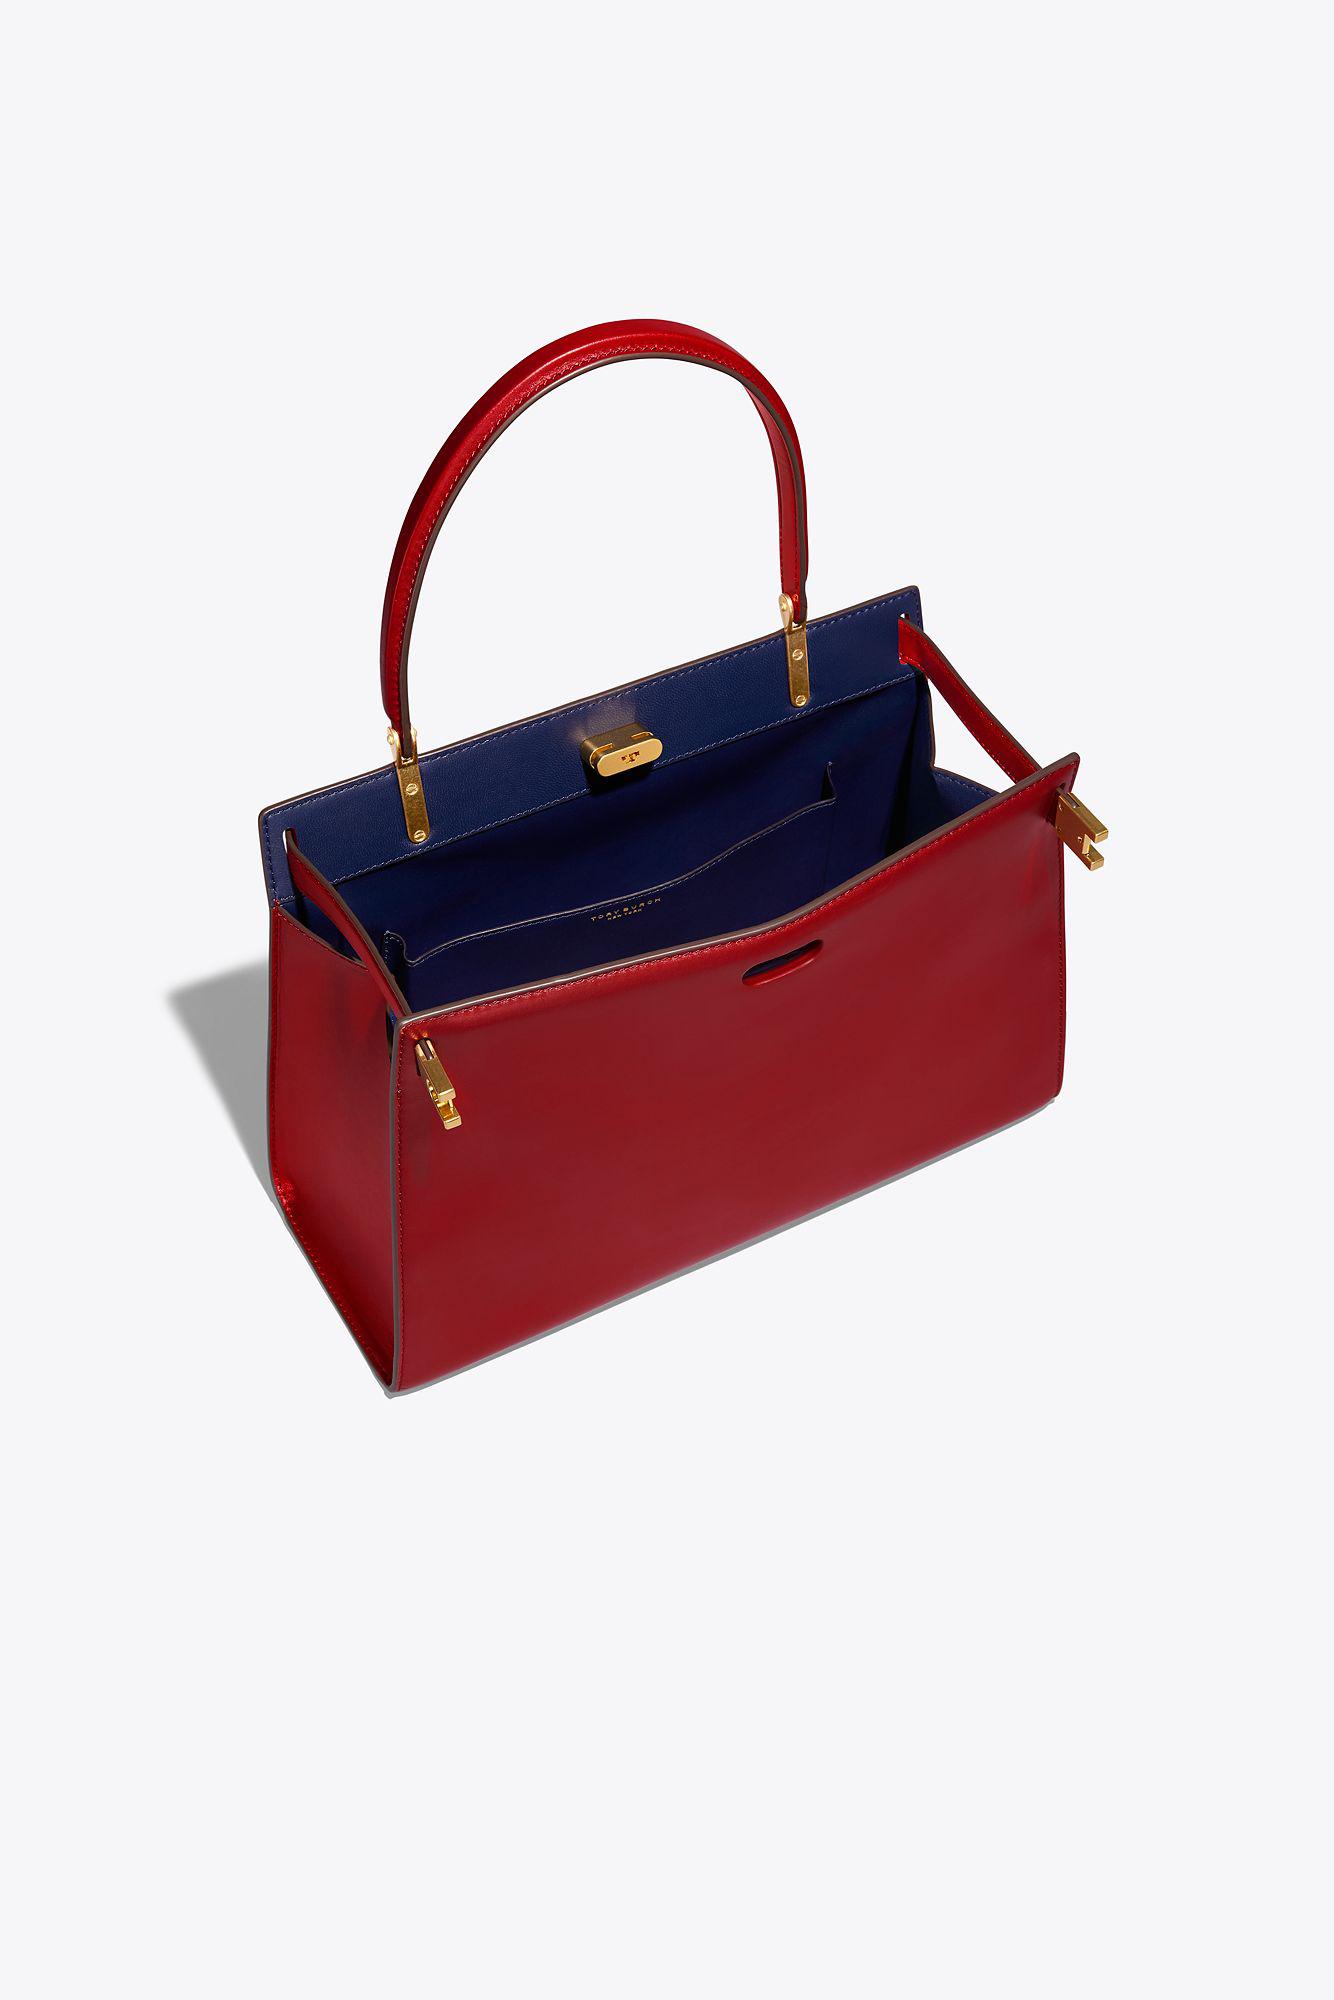 Tory Burch Lee Radziwill Bag in Red | Lyst